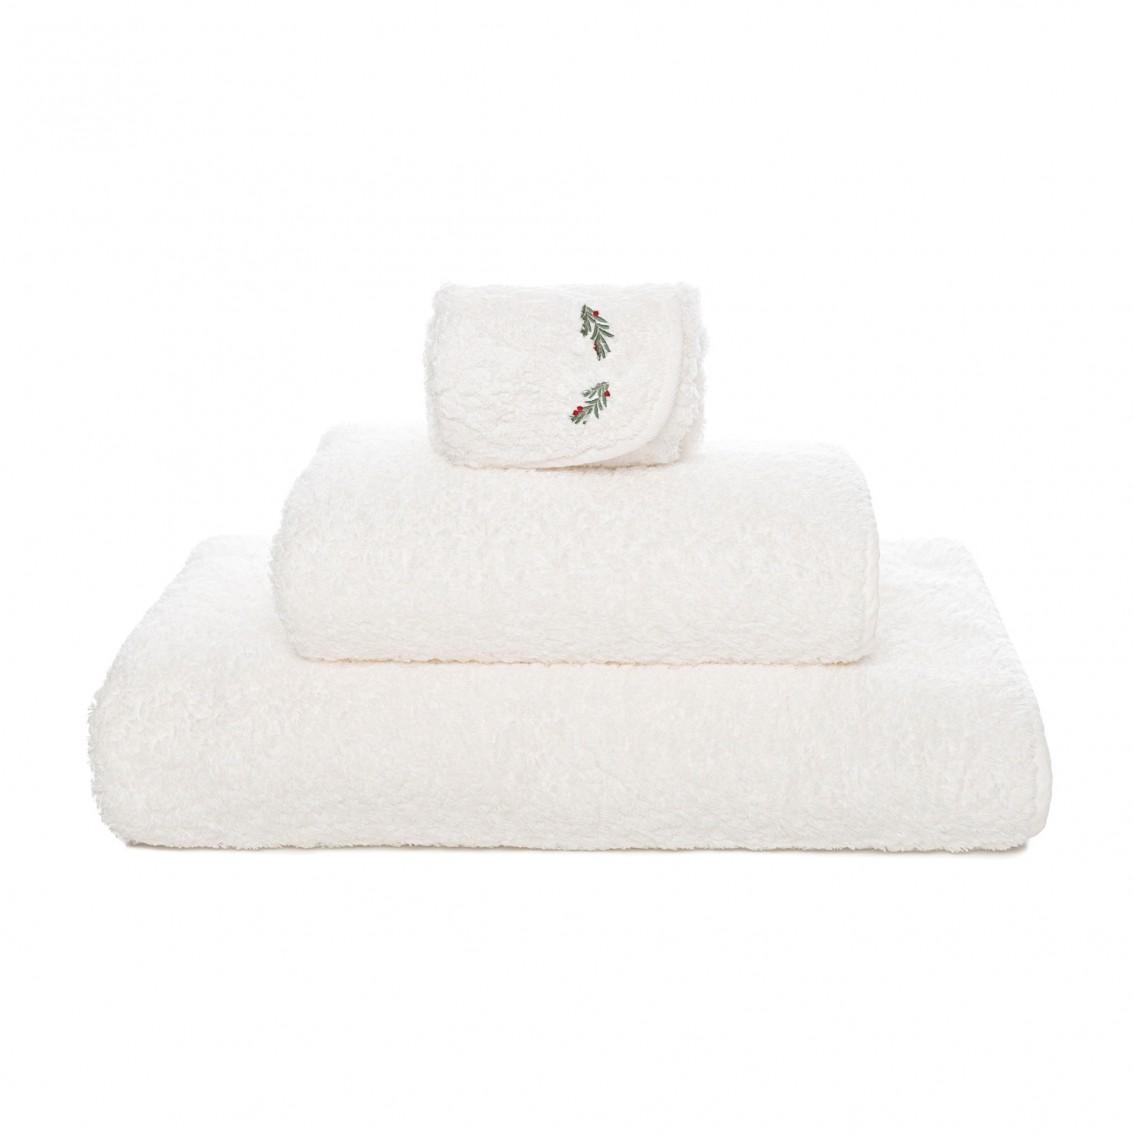 HOLLY TOWELS